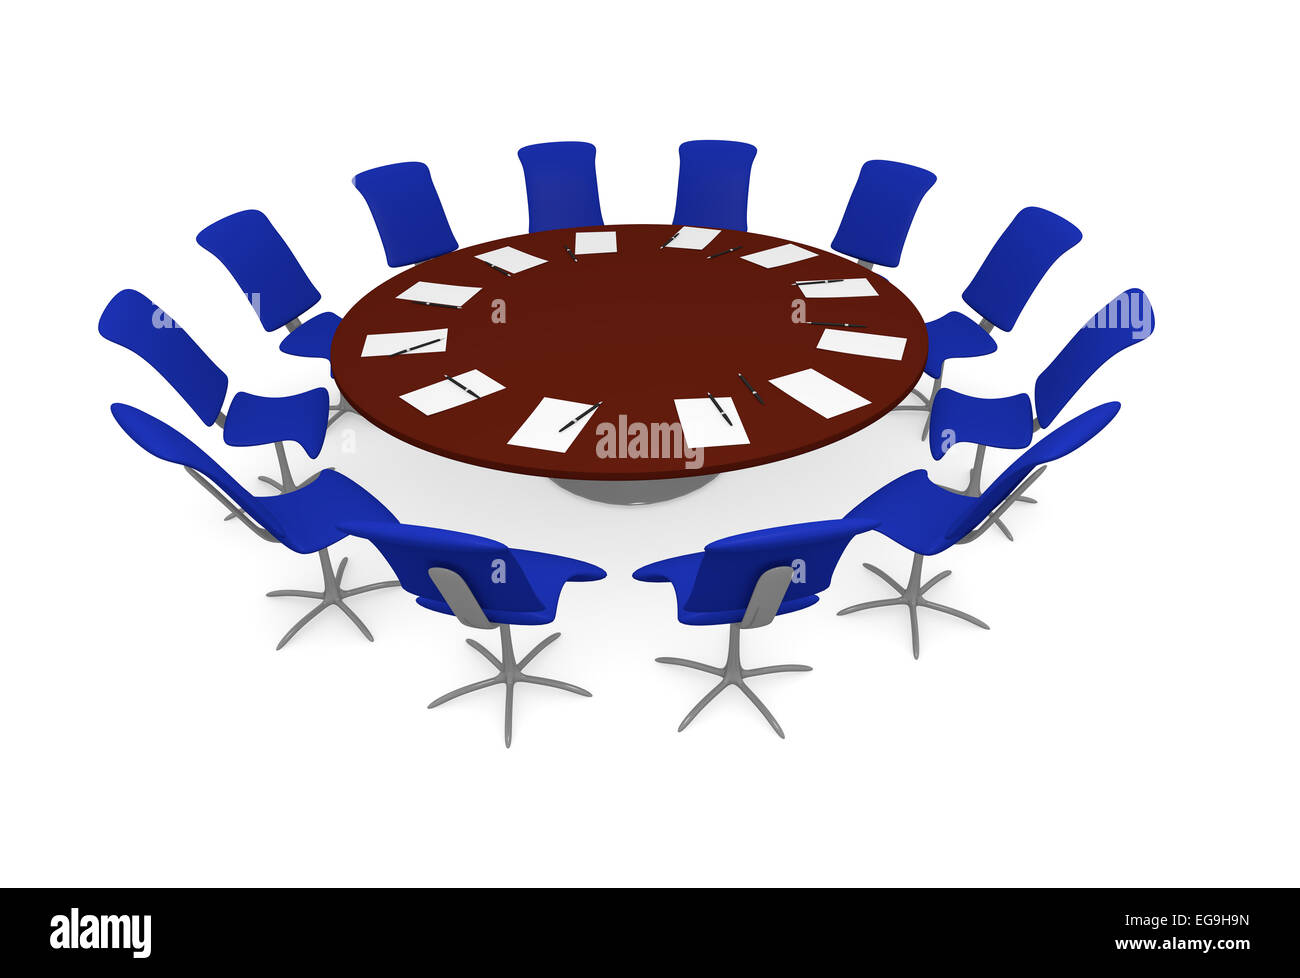 White round conference table and chairs on whi Vector Image